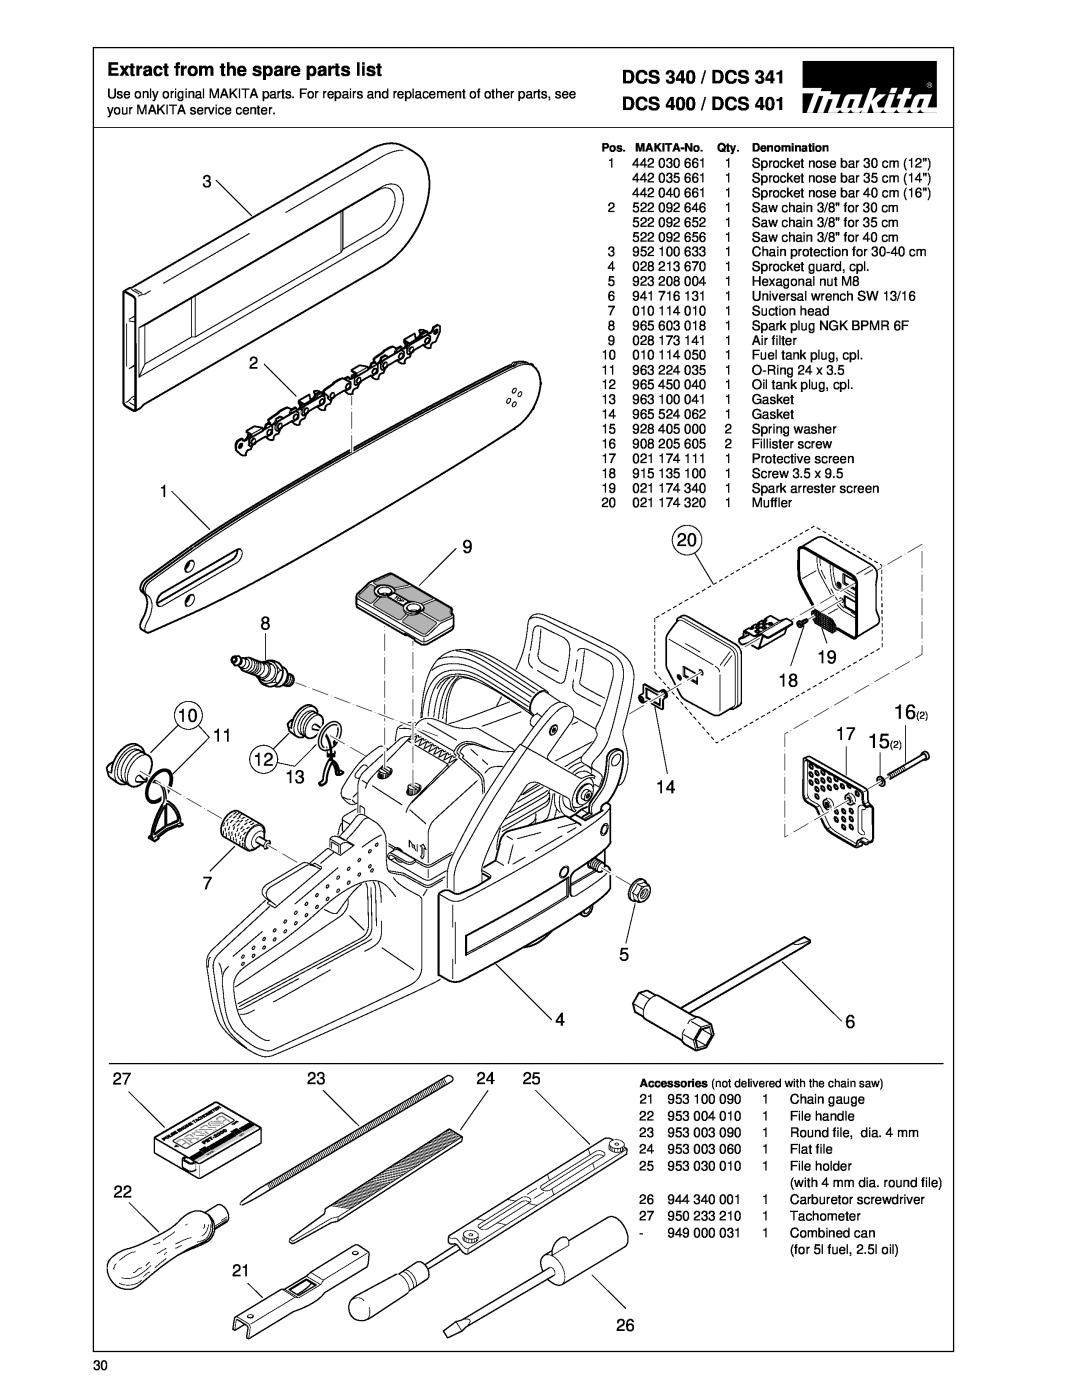 Makita Chain Saw manual Extract from the spare parts list, DCS 400 / DCS, DCS 340 / DCS 